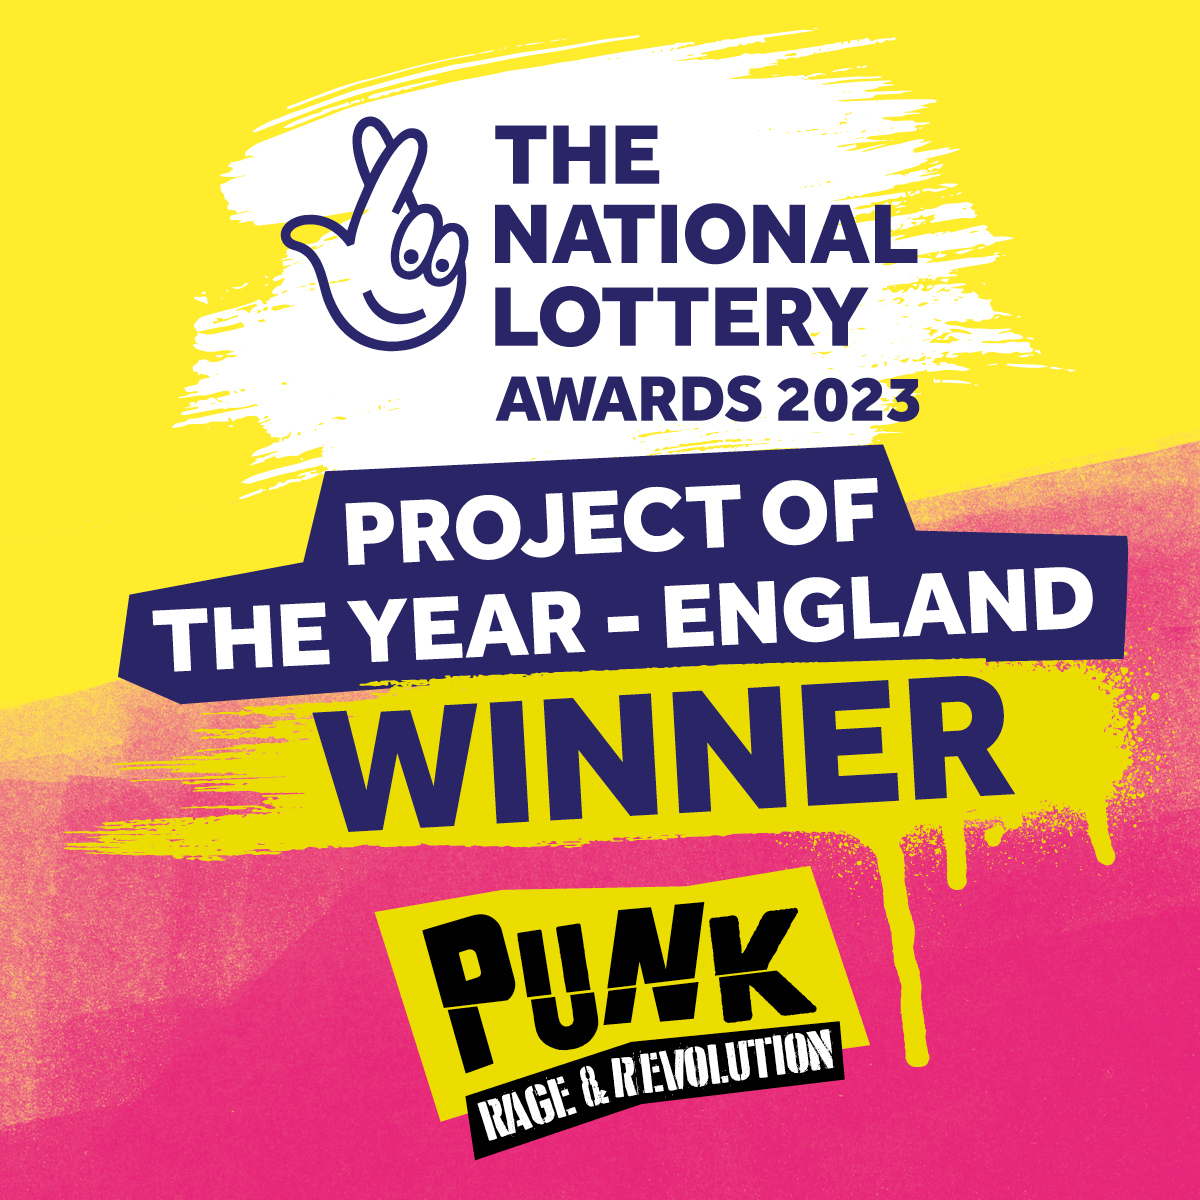 We're delighted to announce that @PunkRandR is National Lottery Project of the Year Award for England winner from nearly 4000 entries!

A huge thanks to all our partners, funders and all who voted, volunteered and visited this amazing exhibition! #NLAwards heritagefund.org.uk/news/success-h…